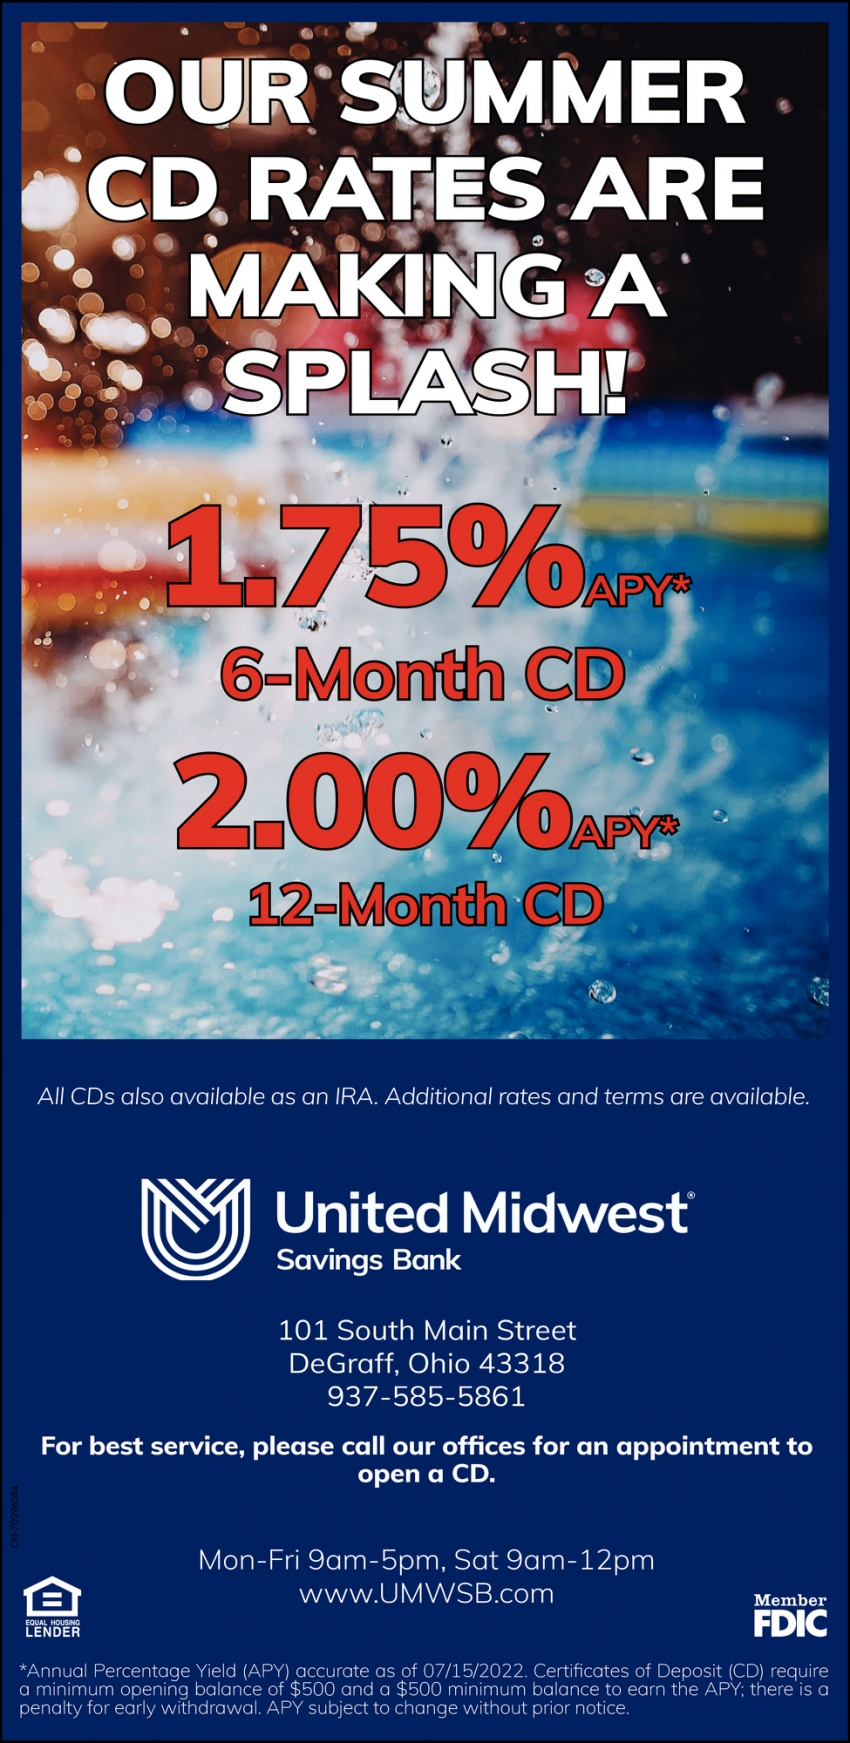 Our Summer CD Rates Are making A Splash